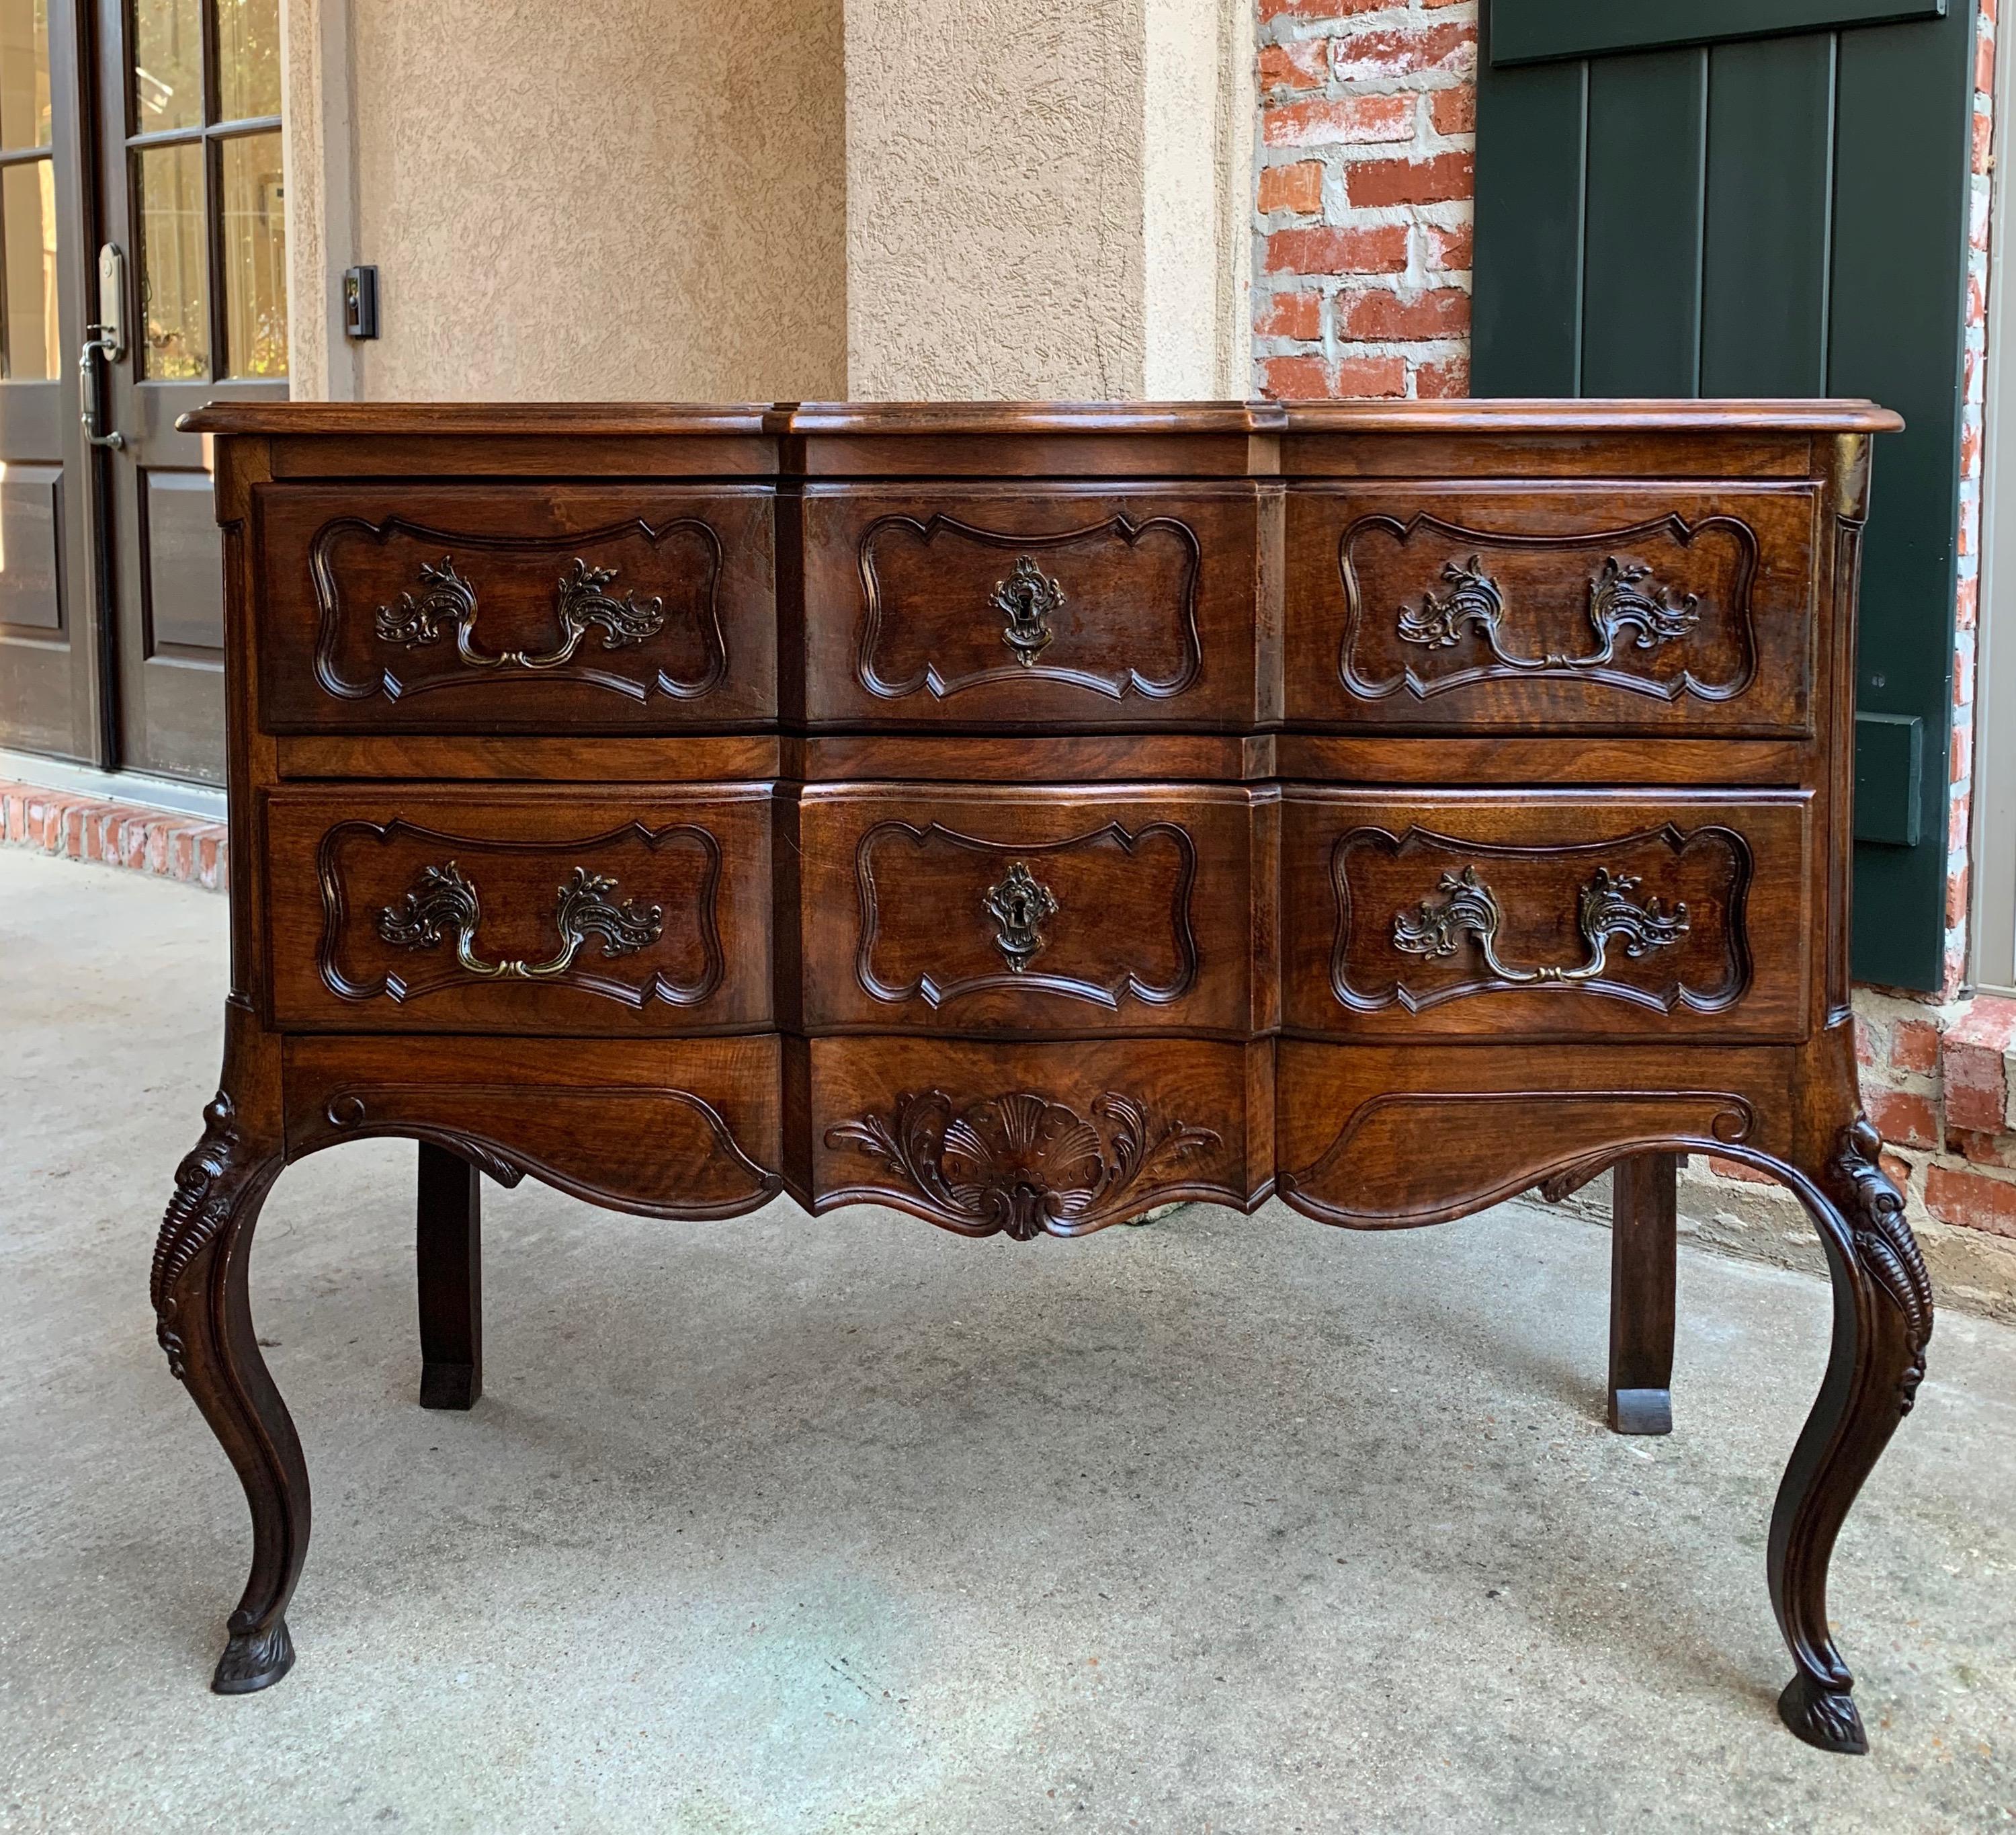 Antique French Carved Walnut Commode Chest of Drawers Sideboard Louis XV Style 14